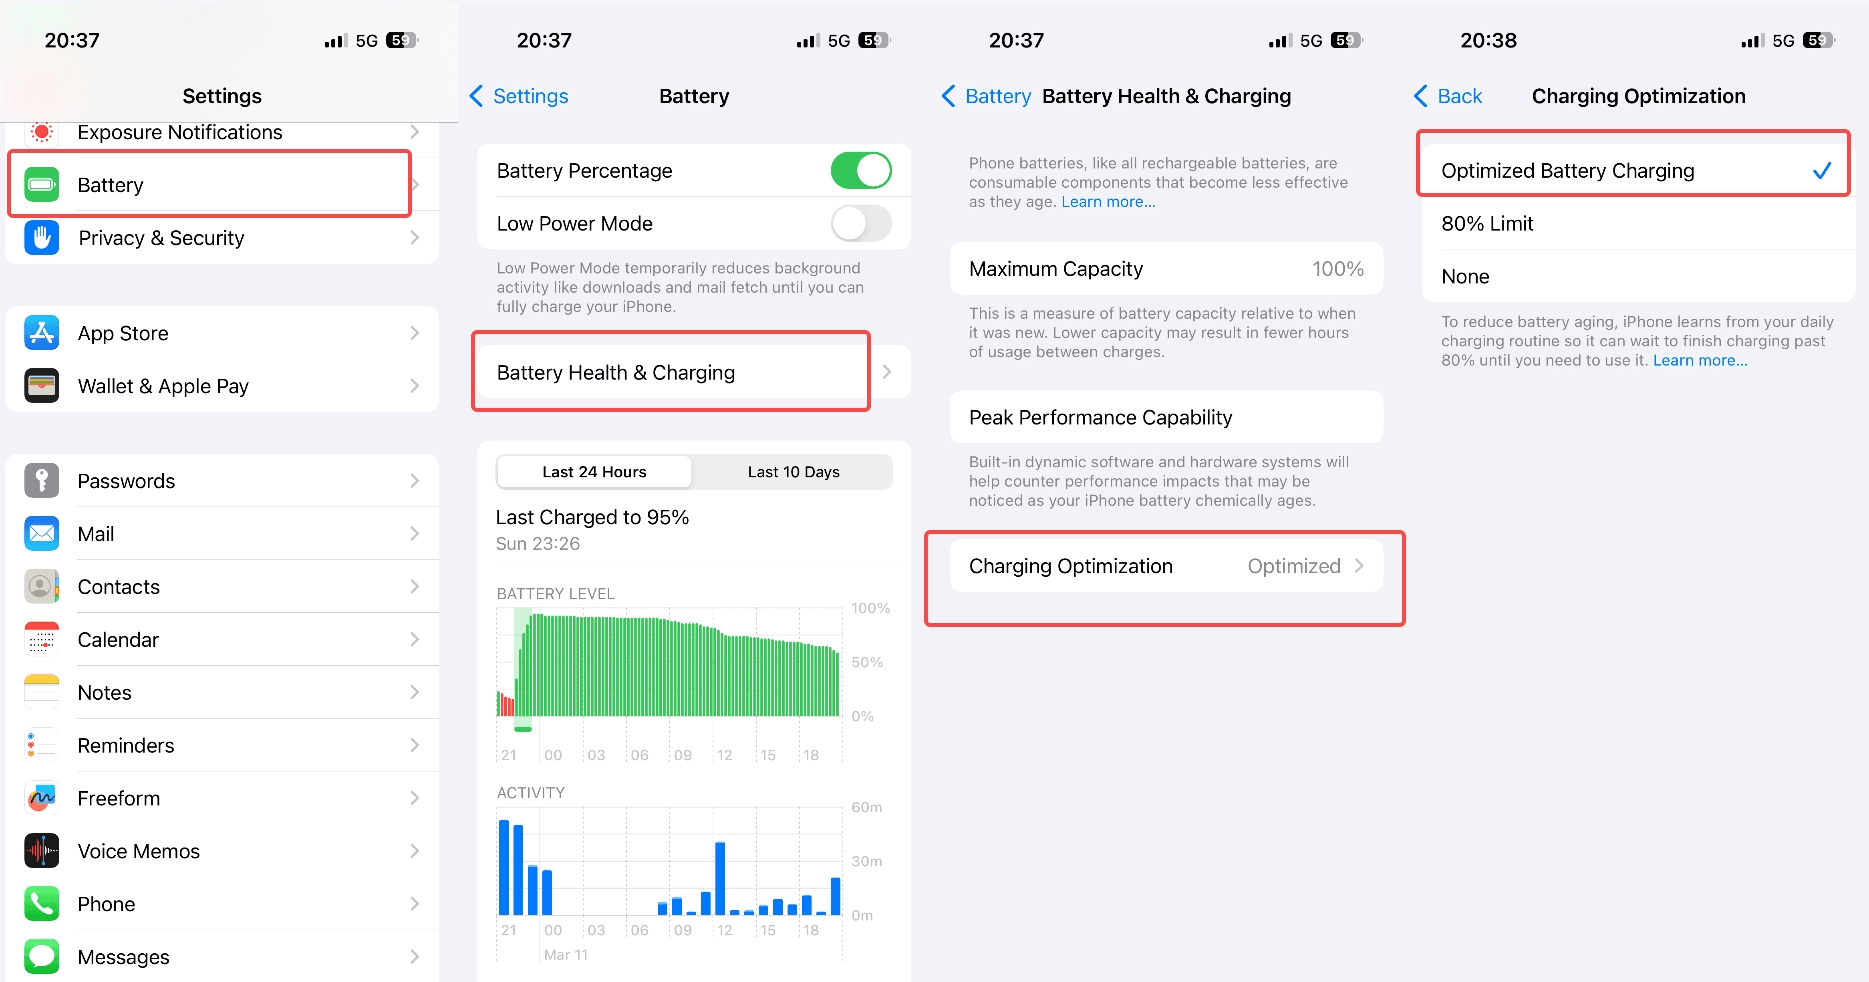 Steps of how to how to activate Optimized Battery Charging.